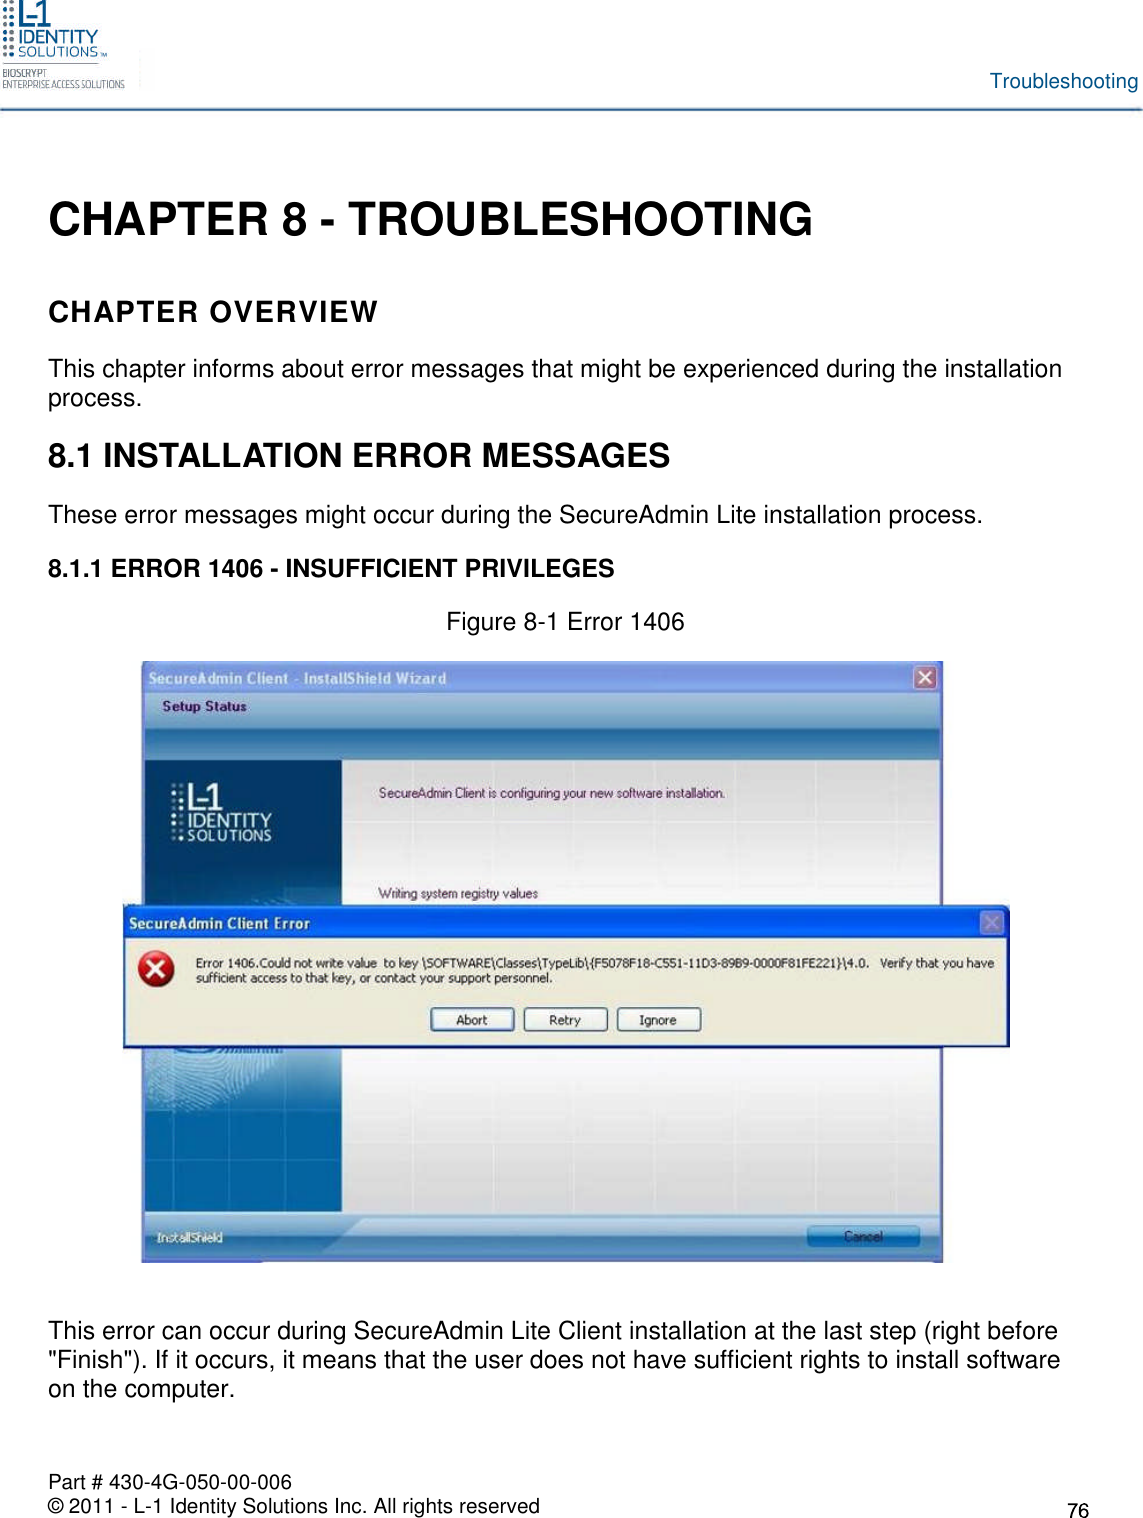 Part # 430-4G-050-00-006© 2011 - L-1 Identity Solutions Inc. All rights reservedTroubleshootingCHAPTER 8 - TROUBLESHOOTINGCHAPTER OVERVIEWThis chapter informs about error messages that might be experienced during the installationprocess.8.1 INSTALLATION ERROR MESSAGESThese error messages might occur during the SecureAdmin Lite installation process.8.1.1 ERROR 1406 - INSUFFICIENT PRIVILEGESFigure 8-1 Error 1406This error can occur during SecureAdmin Lite Client installation at the last step (right before&quot;Finish&quot;). If it occurs, it means that the user does not have sufficient rights to install softwareon the computer.